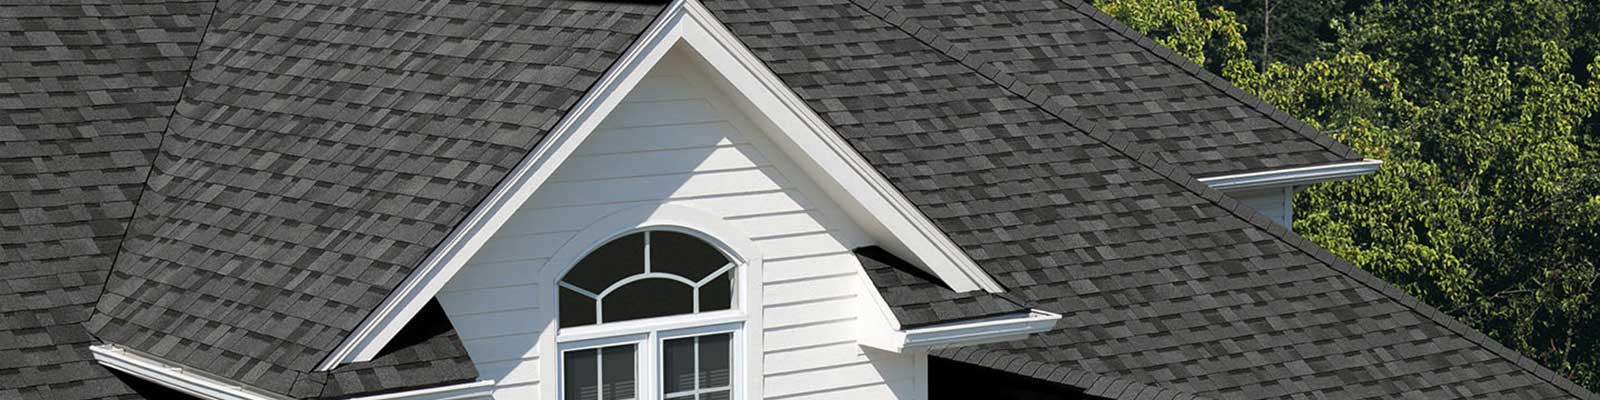 How Roofing and Siding Impact Energy Efficiency in Homes